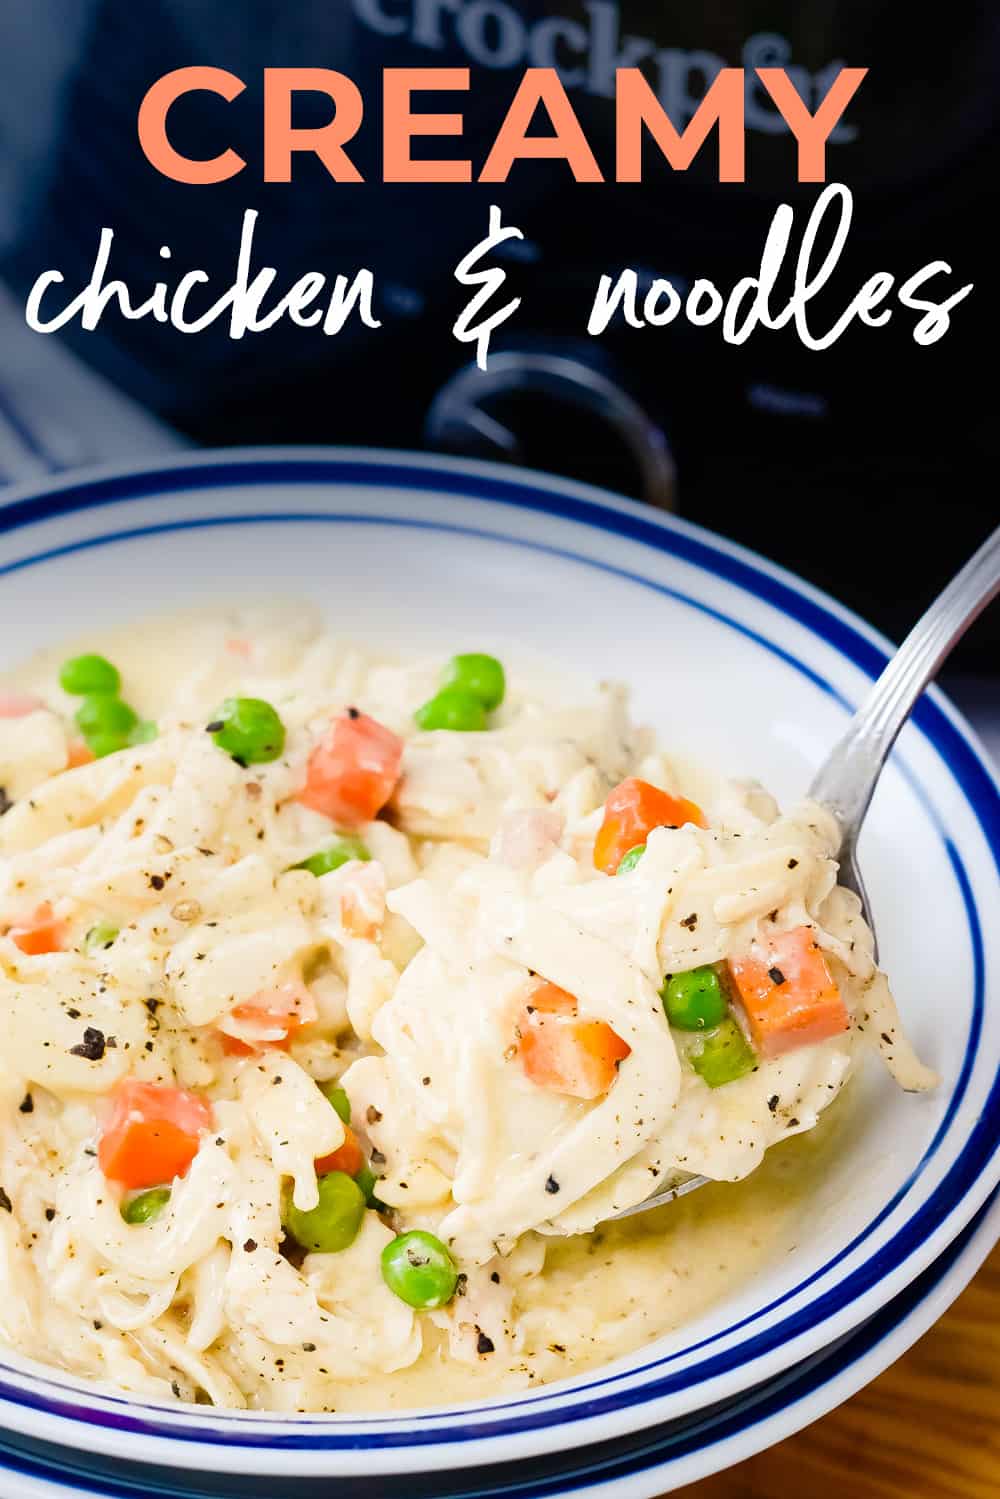 Creamy crockpot chicken and noodles on spoon over bowl.